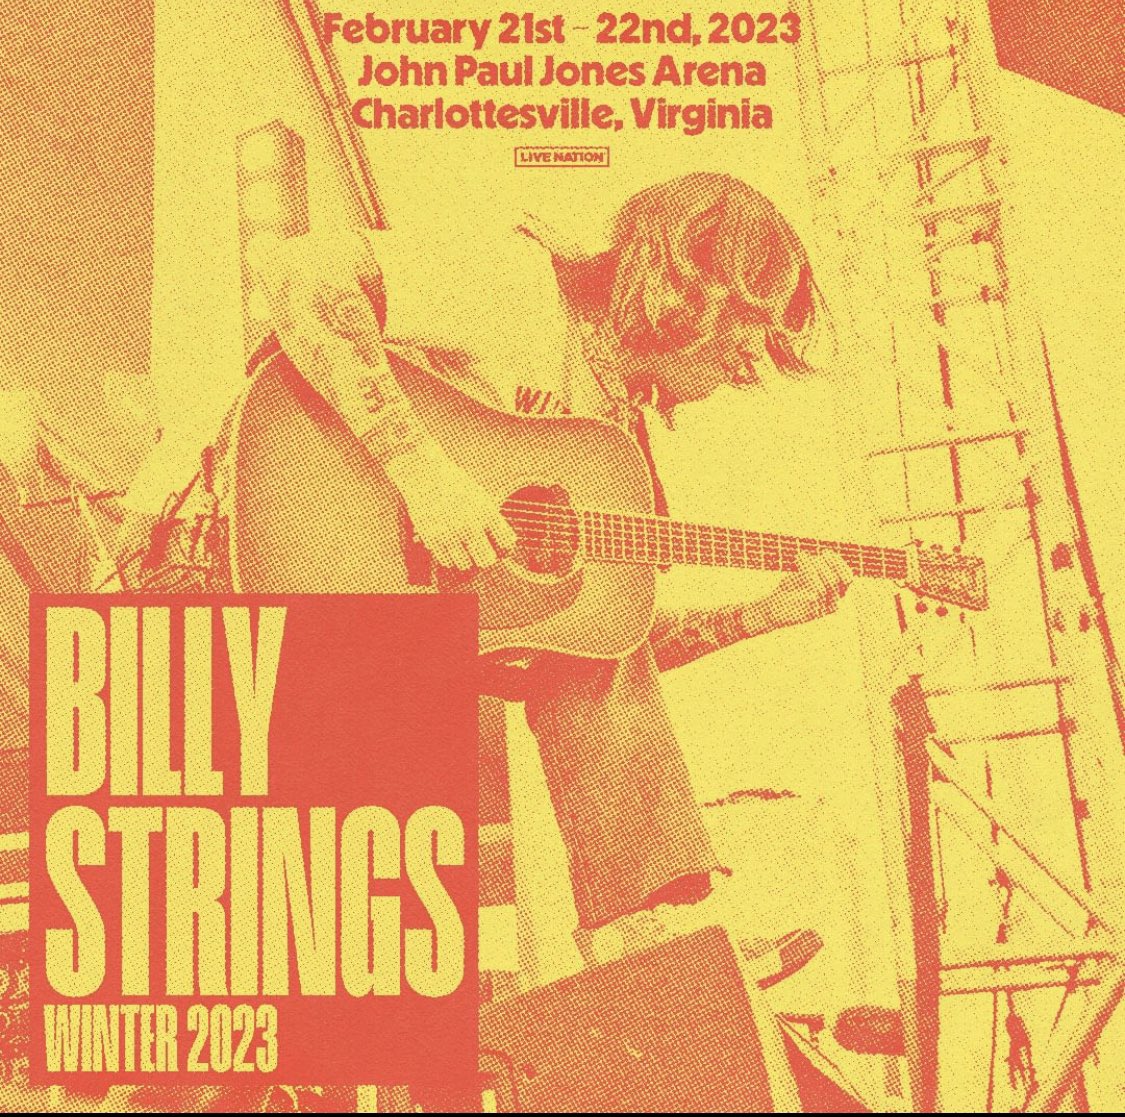 Today just may be the best day to join #WNRN It’s $5 Friday where you’ll not only get a big bundle of TY gifts, you’ll be entered to win tix to see @BillyStrings BOTH nights in #Cville + donating NOW 5-6p 12/9 you’ll help us unlock a challenge! Donate now WNRN.org